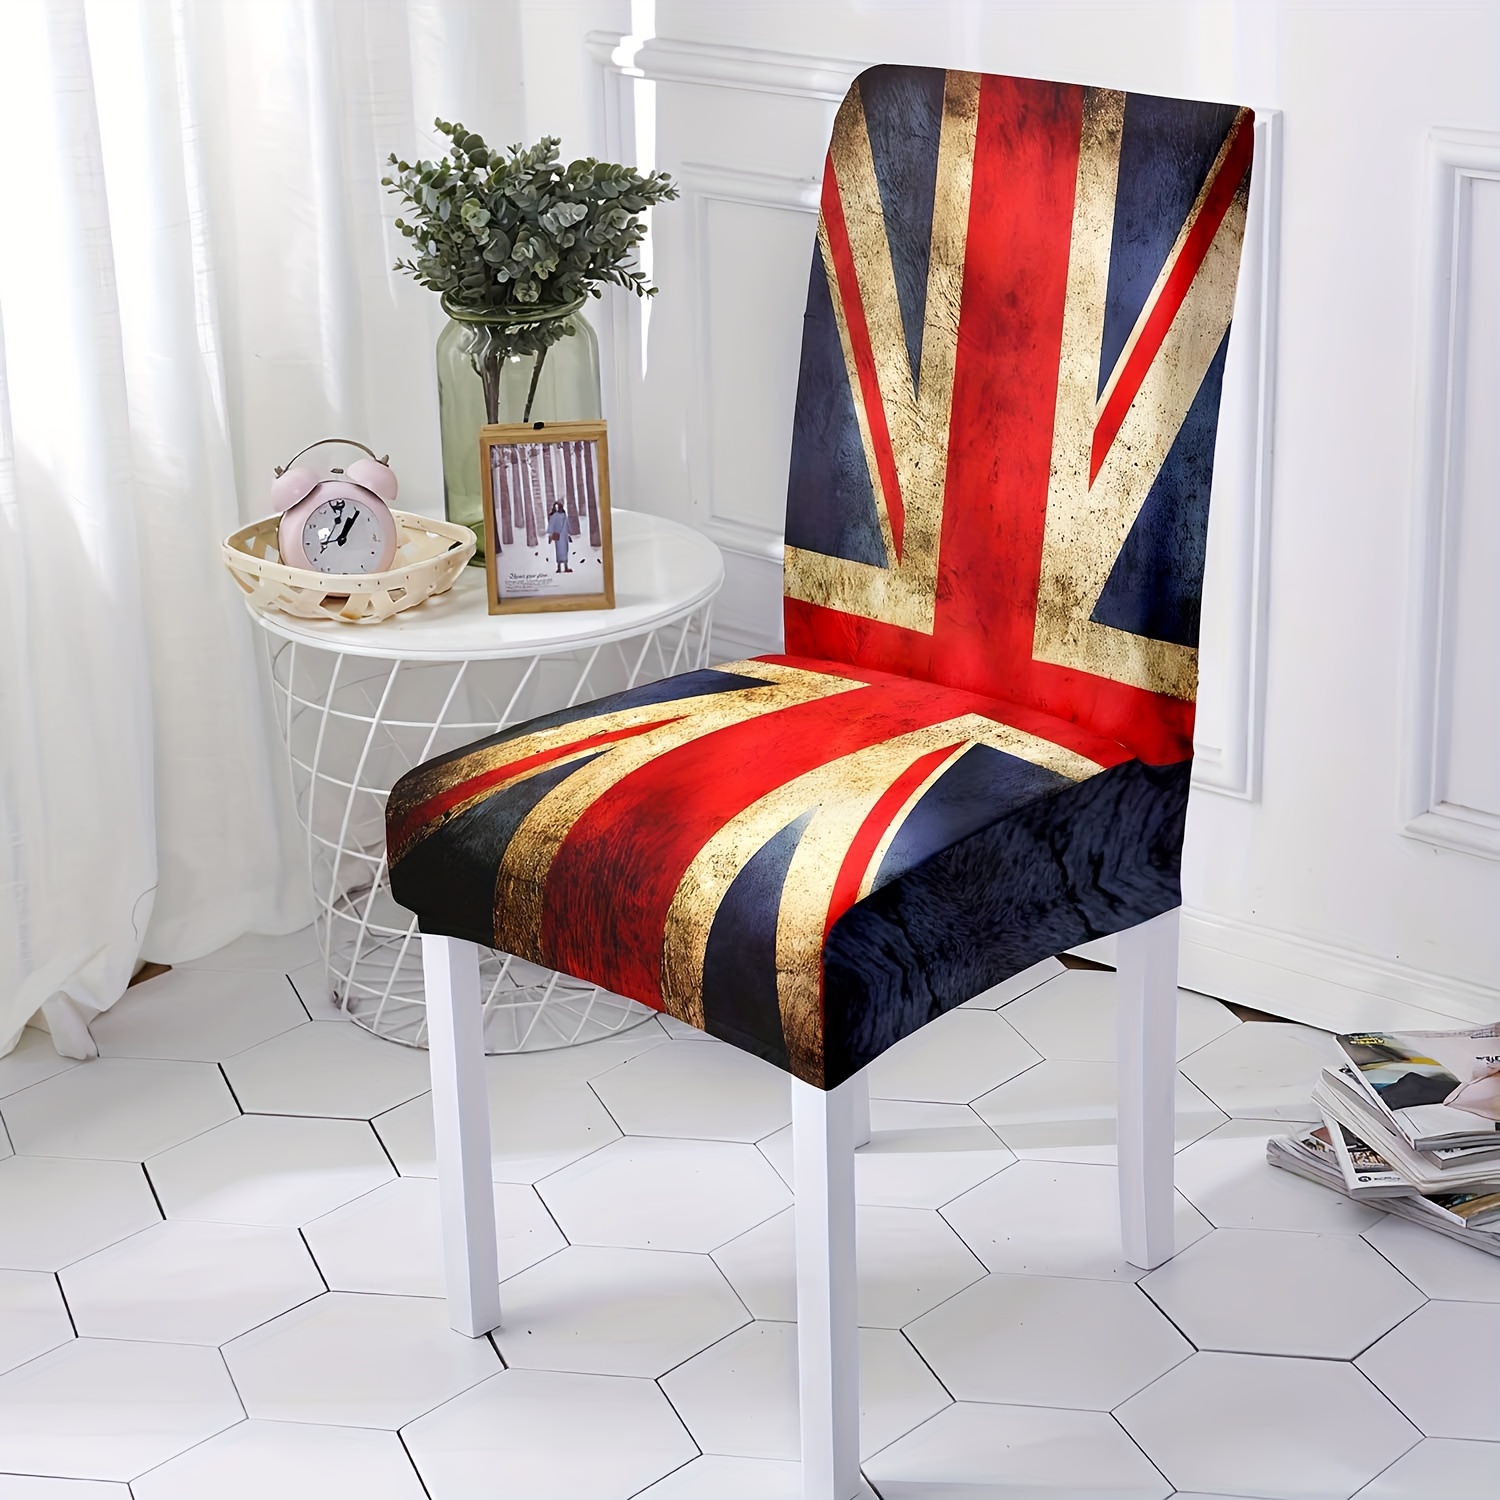 

4/6pcs Uk Flag Print Chair Slipcovers, Stretch Dining Chair Cover, Furniture Protective Cover, For Dining Room Living Room Hotel Home Decor